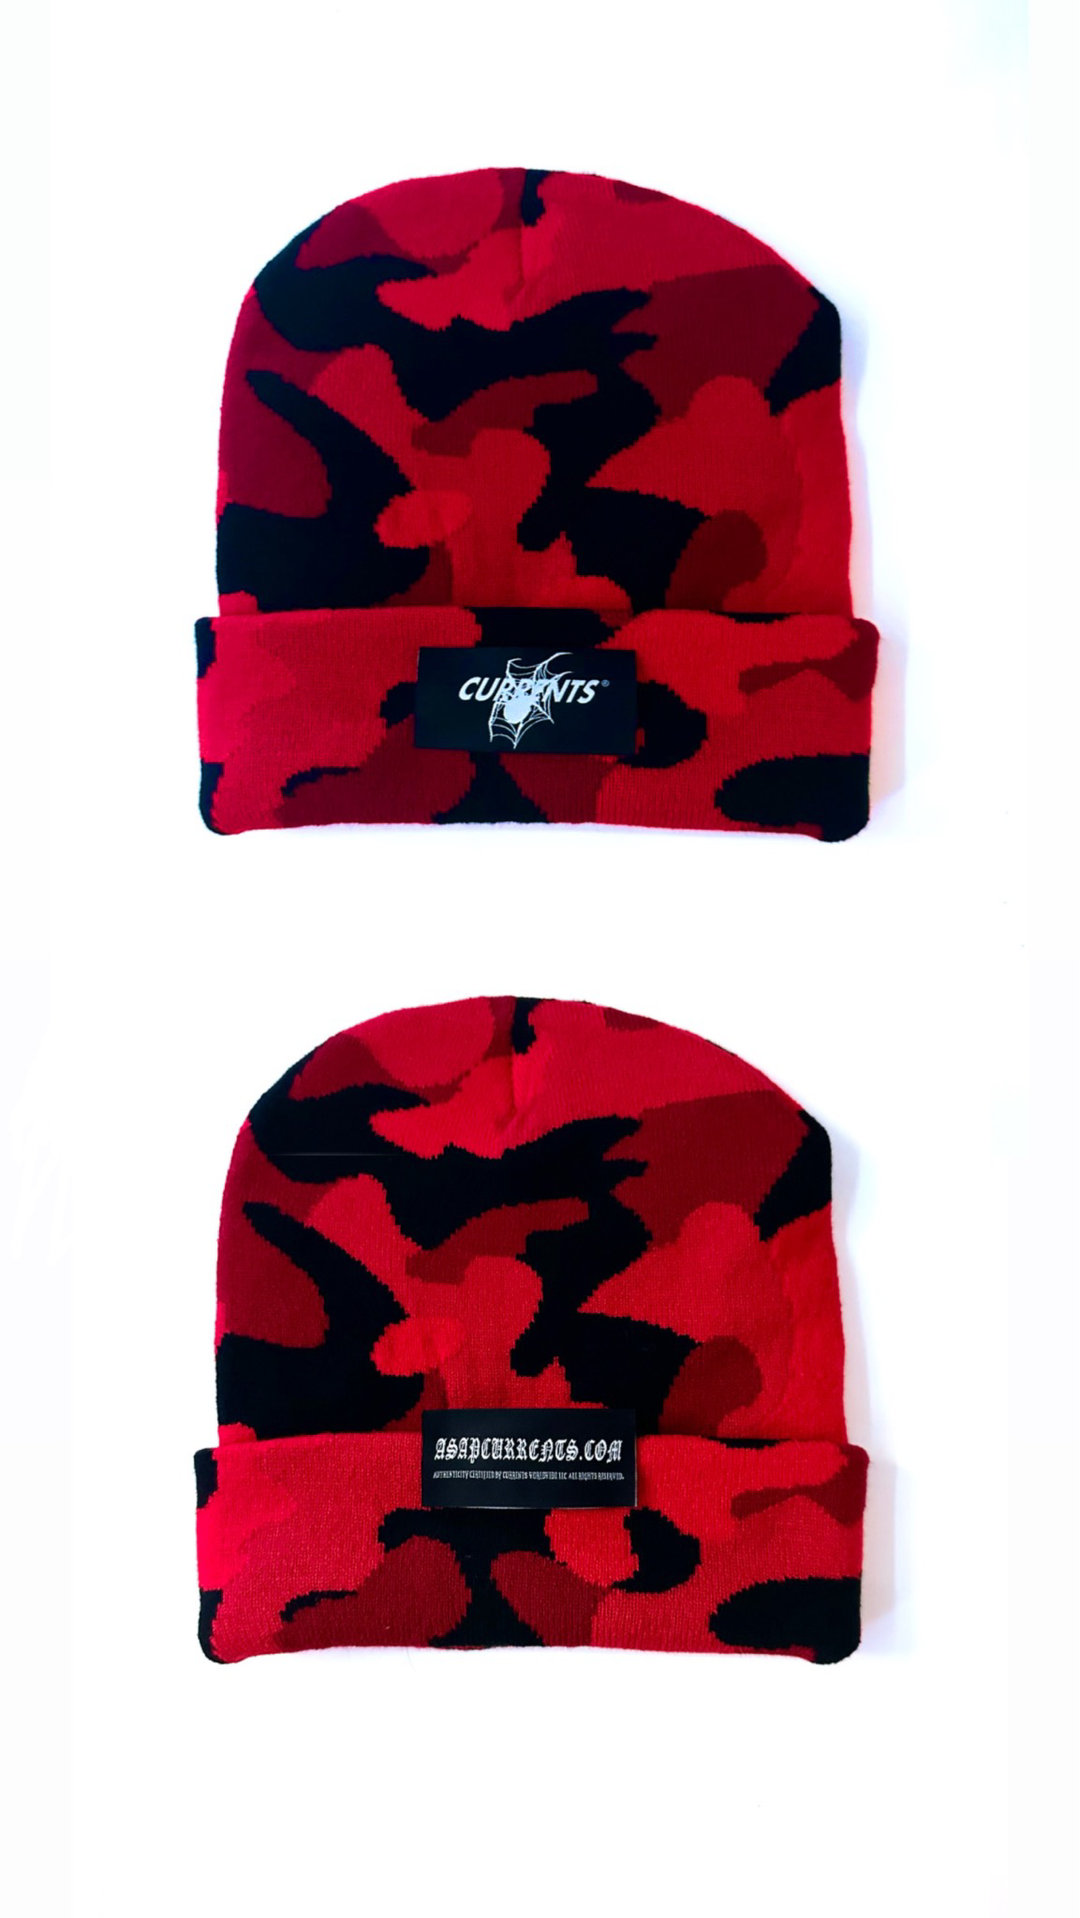 New: Currents Spider Logo Patch Beanie